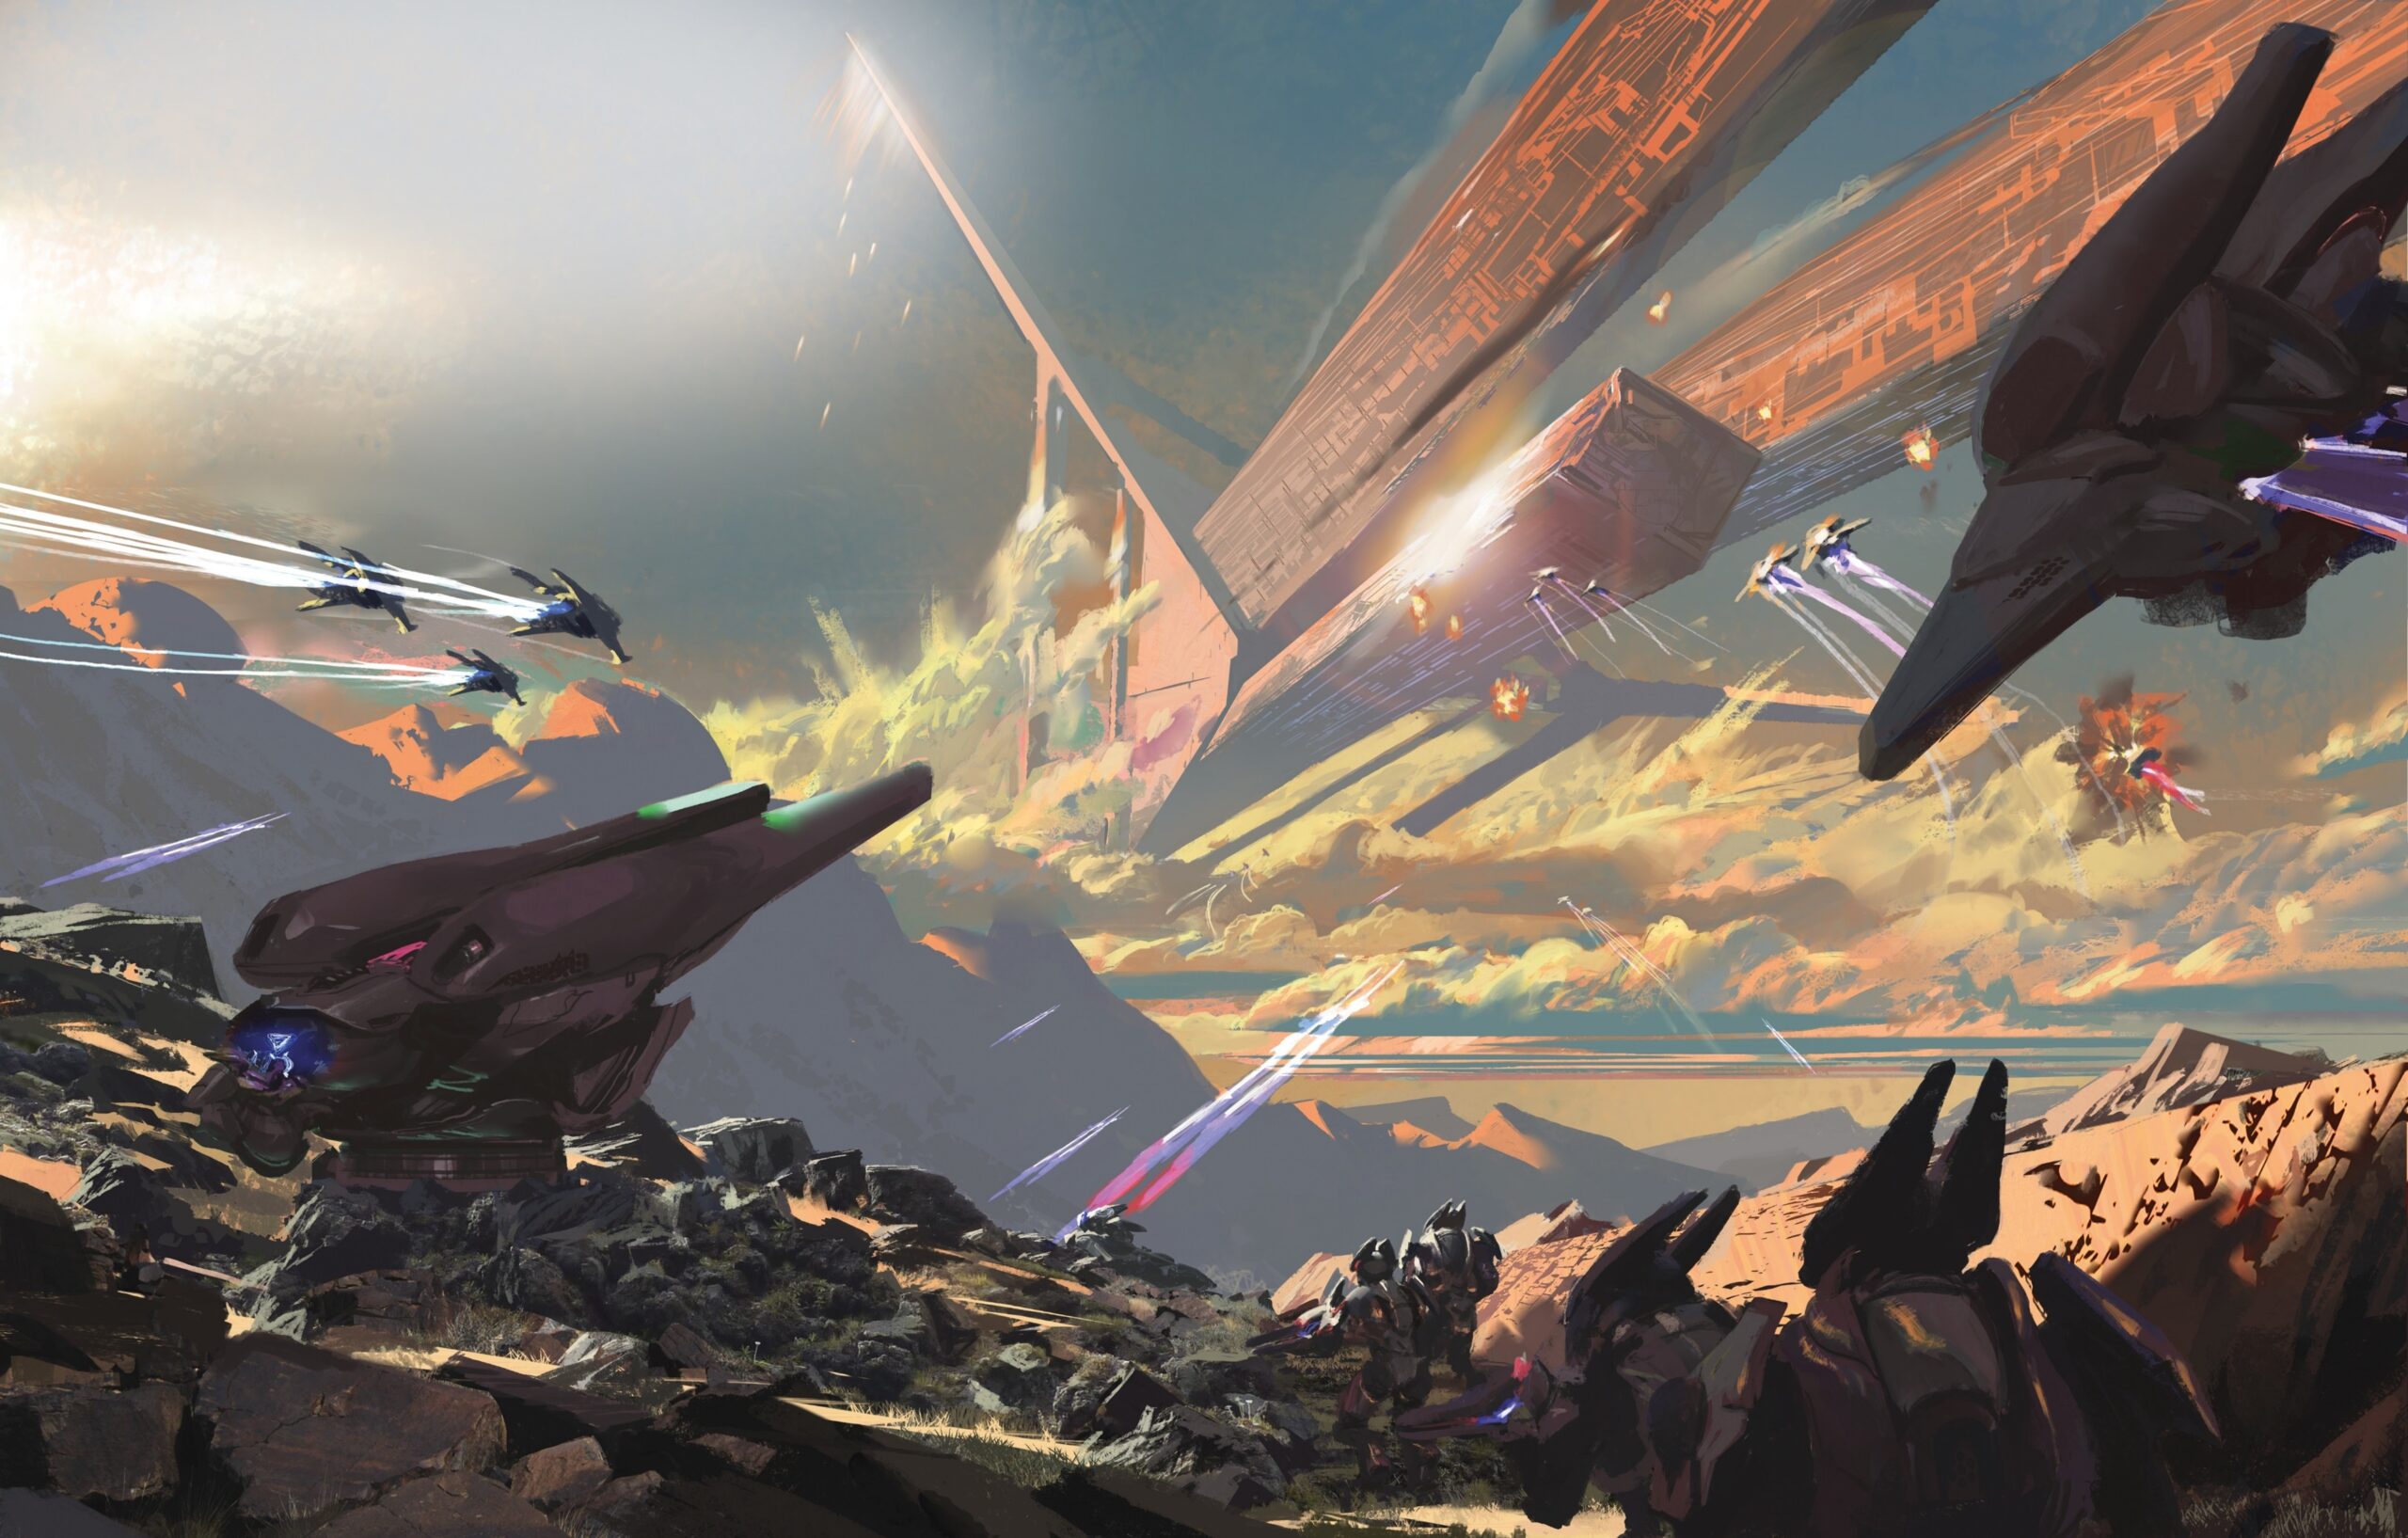 Halo Mythos art by David Heidhoff showing the War of Beginnings between the Sangheili and San'Shyuum on the world of Ulgethon